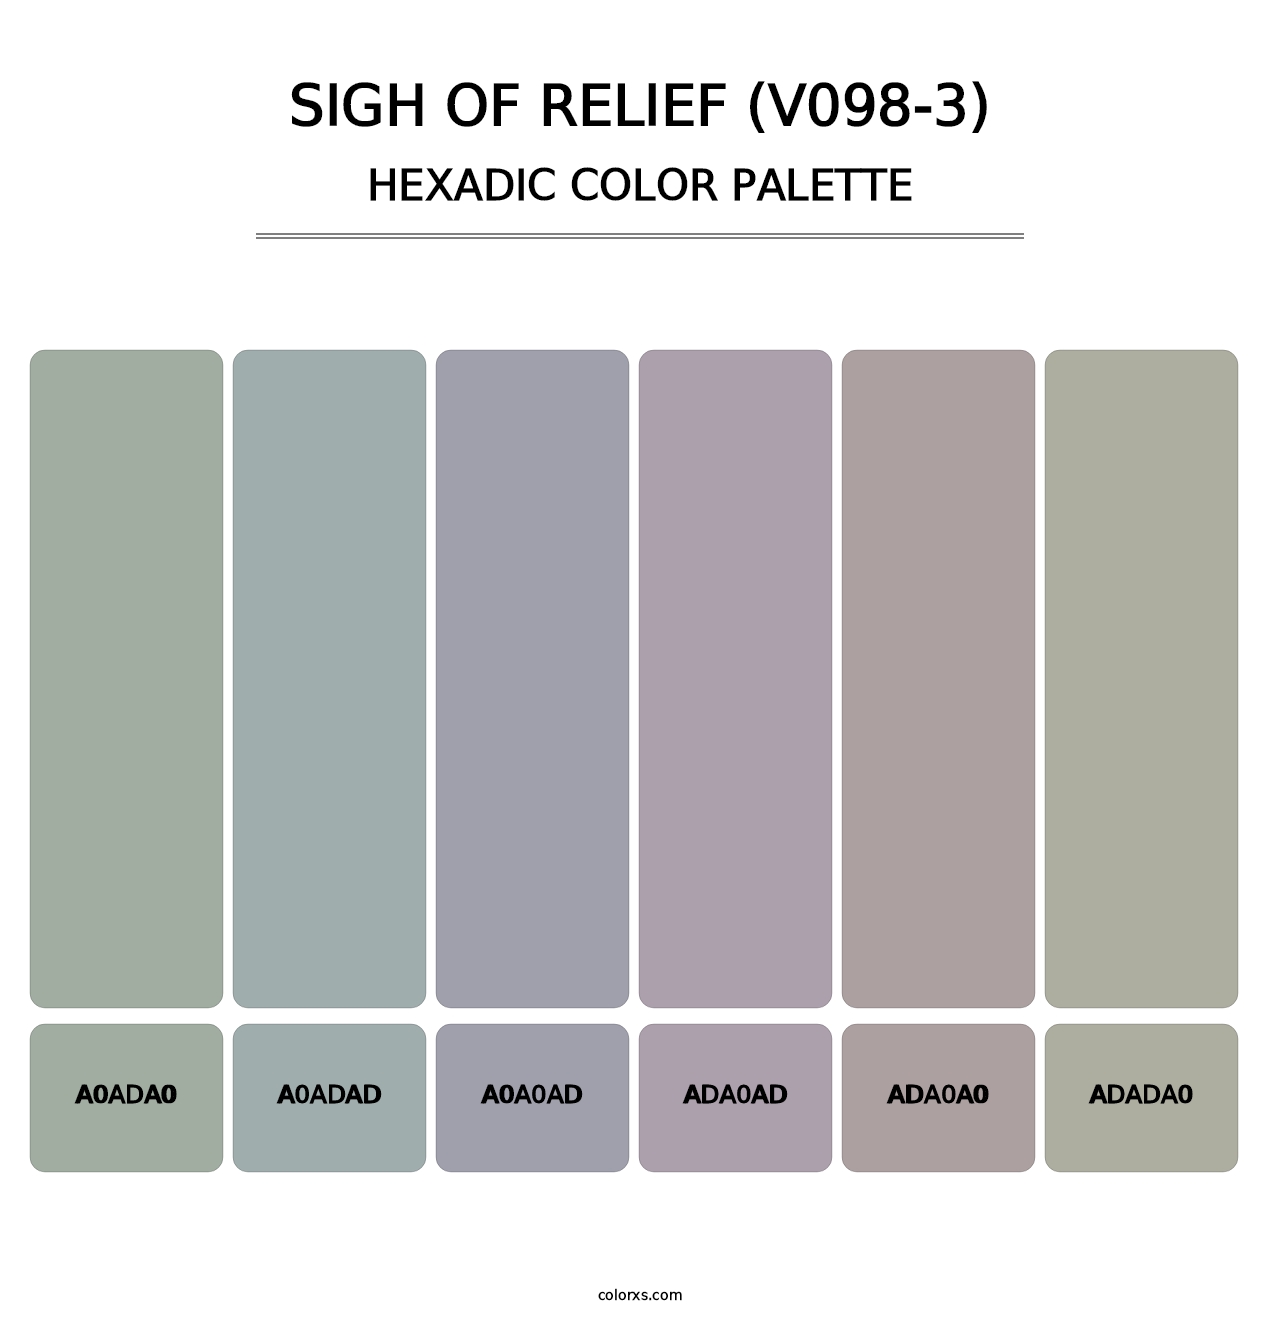 Sigh of Relief (V098-3) - Hexadic Color Palette